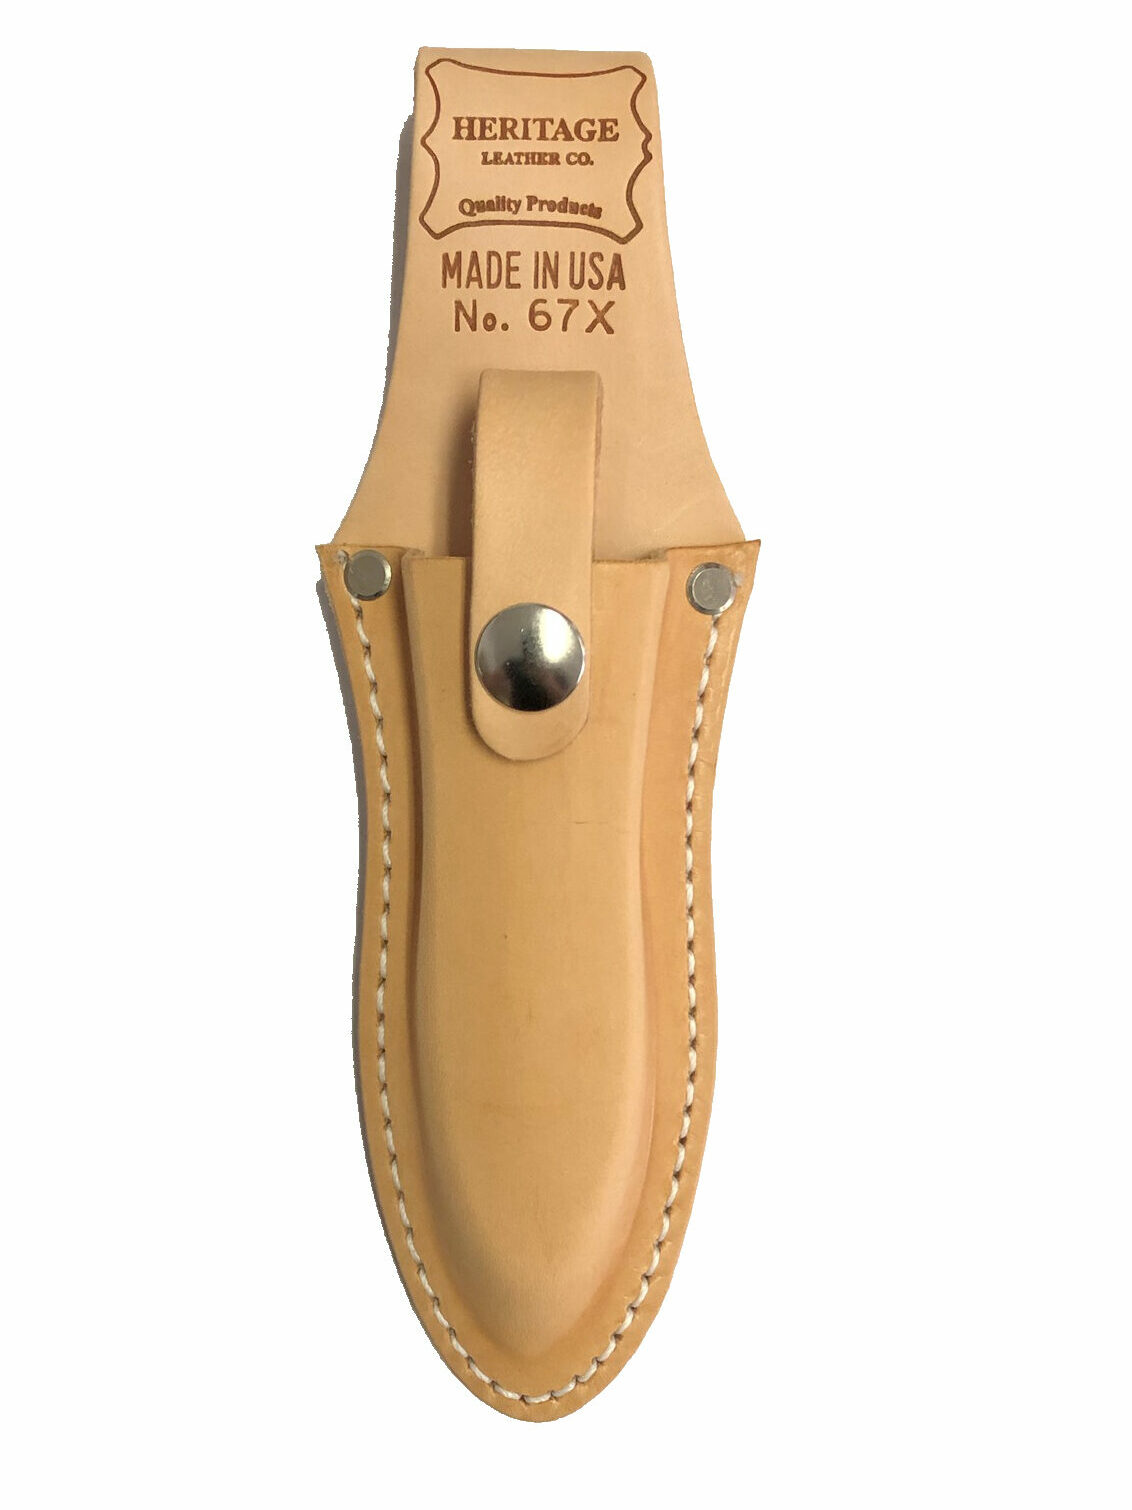 ORIGINAL Pliers Holder with Safety Strap HERITAGE LEATHER